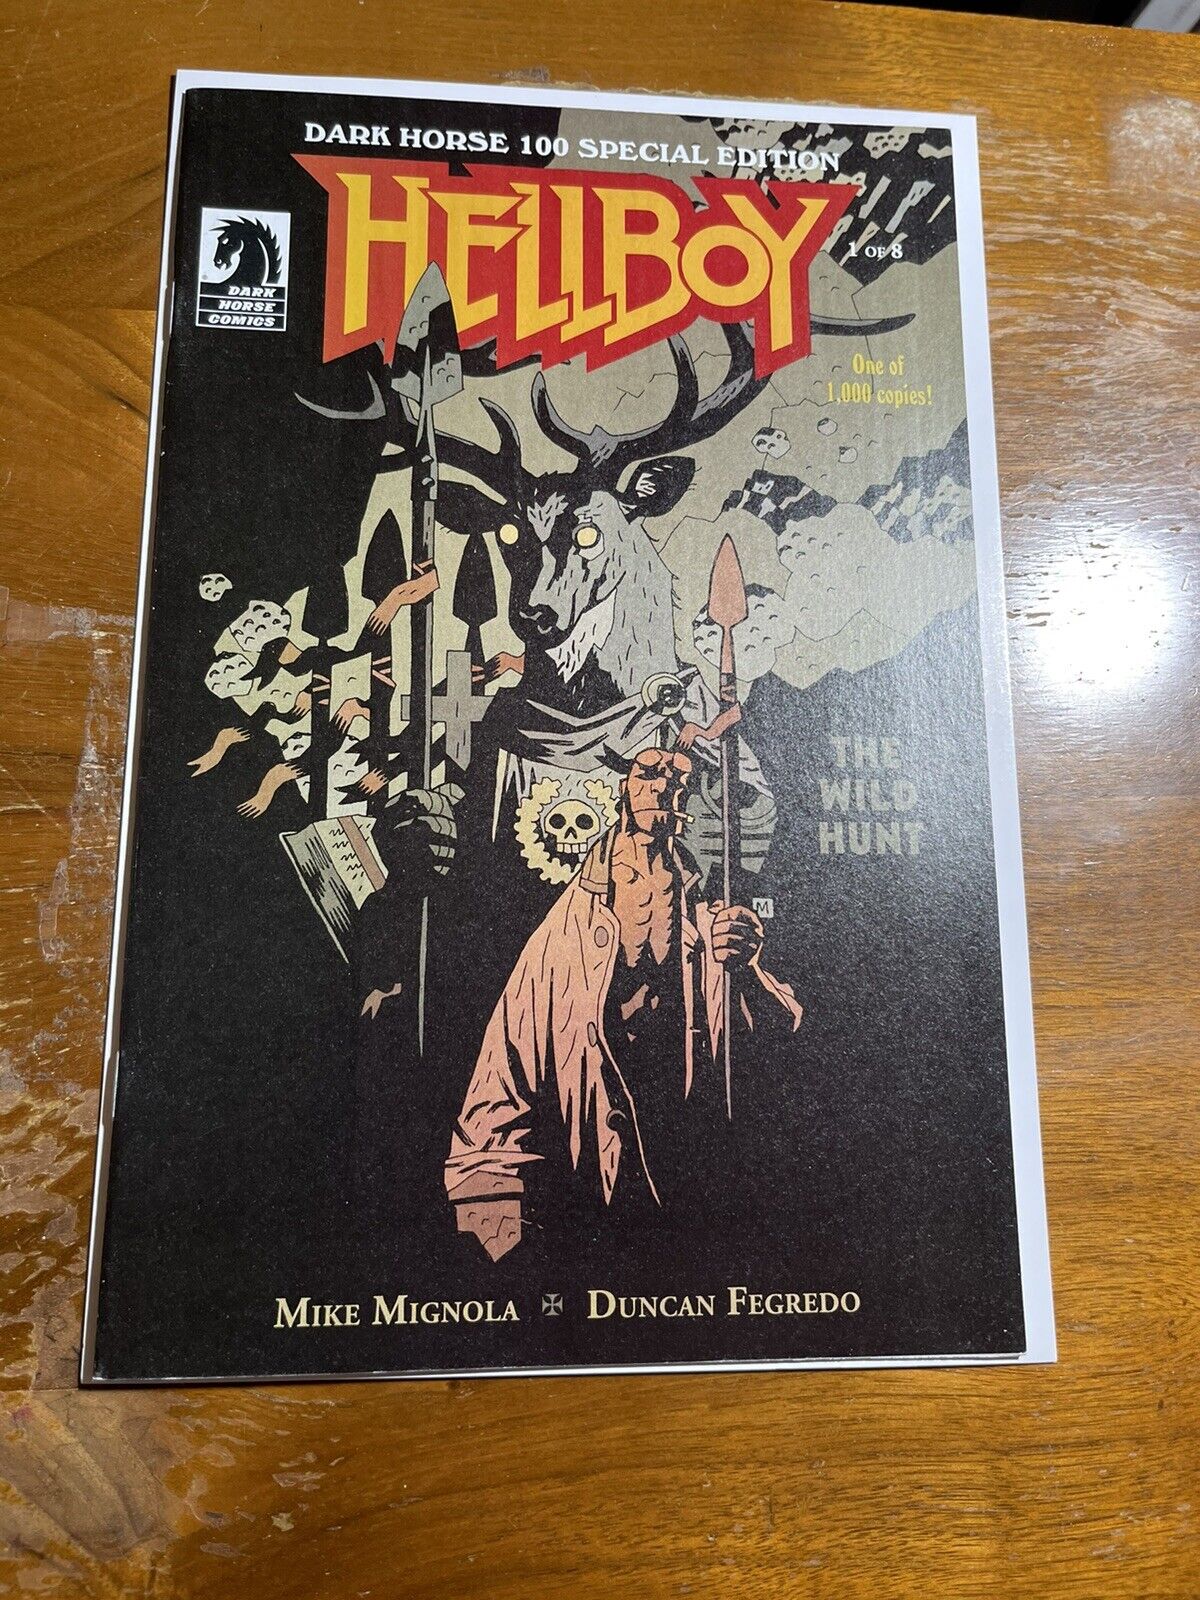 Hellboy The Wild Hunt #1 NM Dark Horse Variant Comic Book Only 1,000 Copies